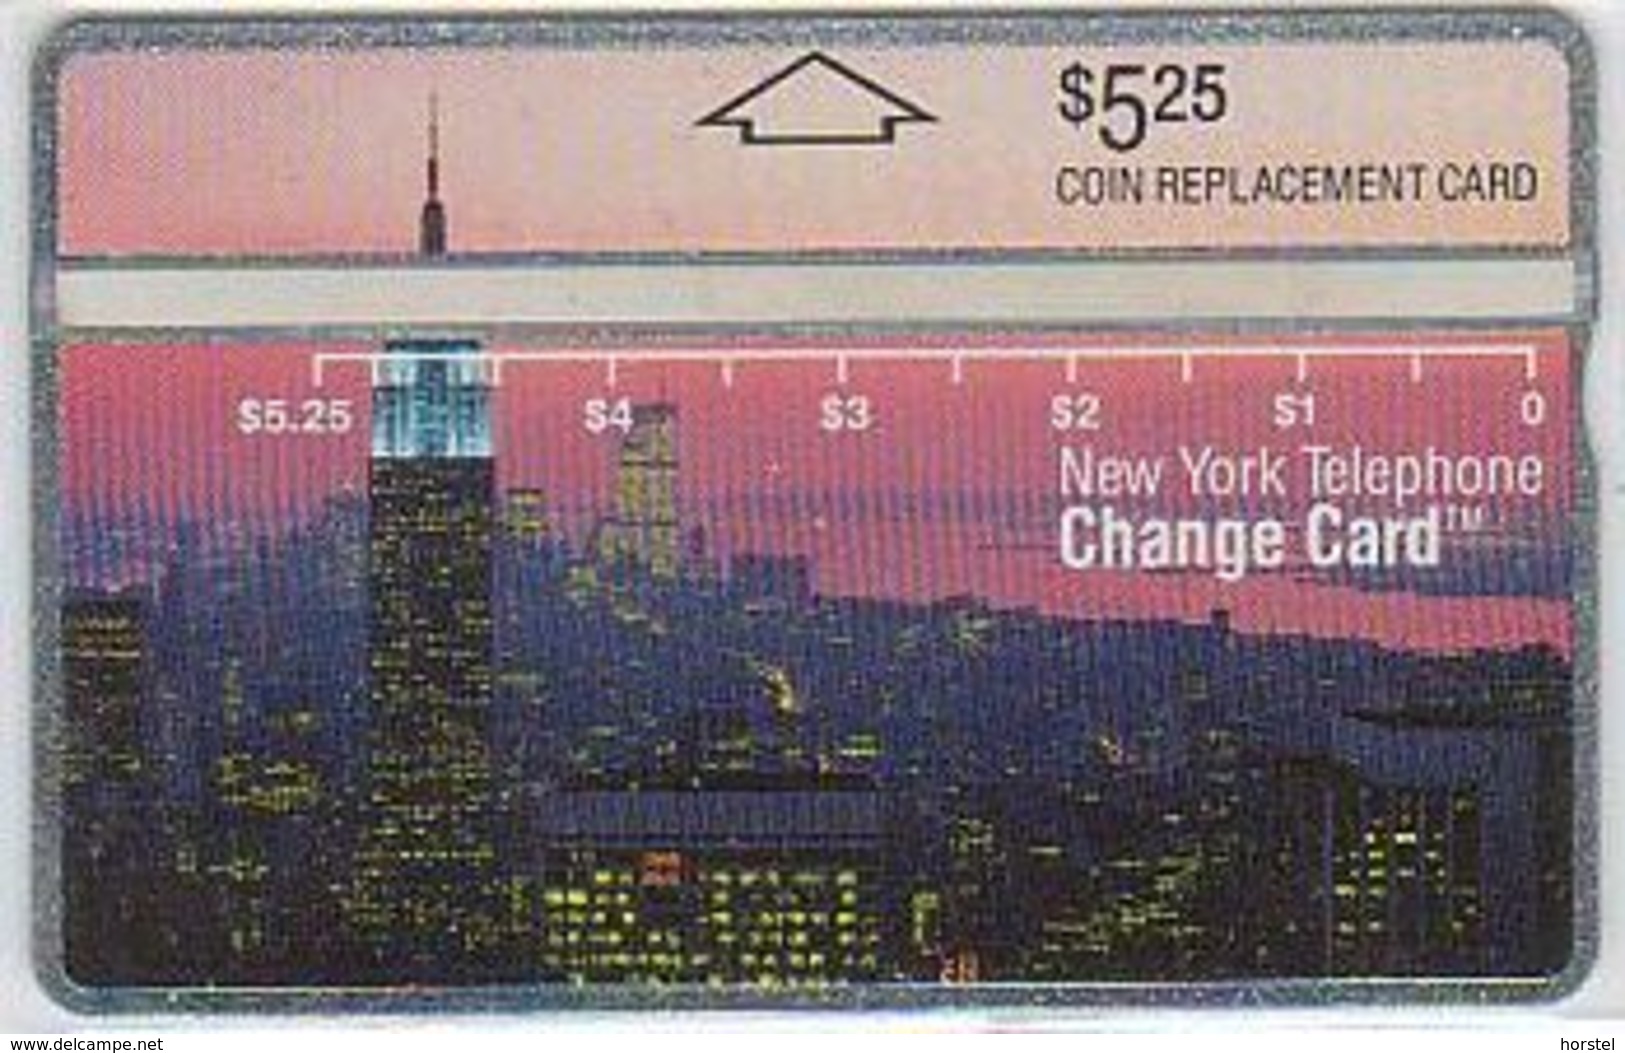 USA NYNEX NL-05 NYC By Night , White Letters, 210B, Mint - Schede Olografiche (Landis & Gyr)